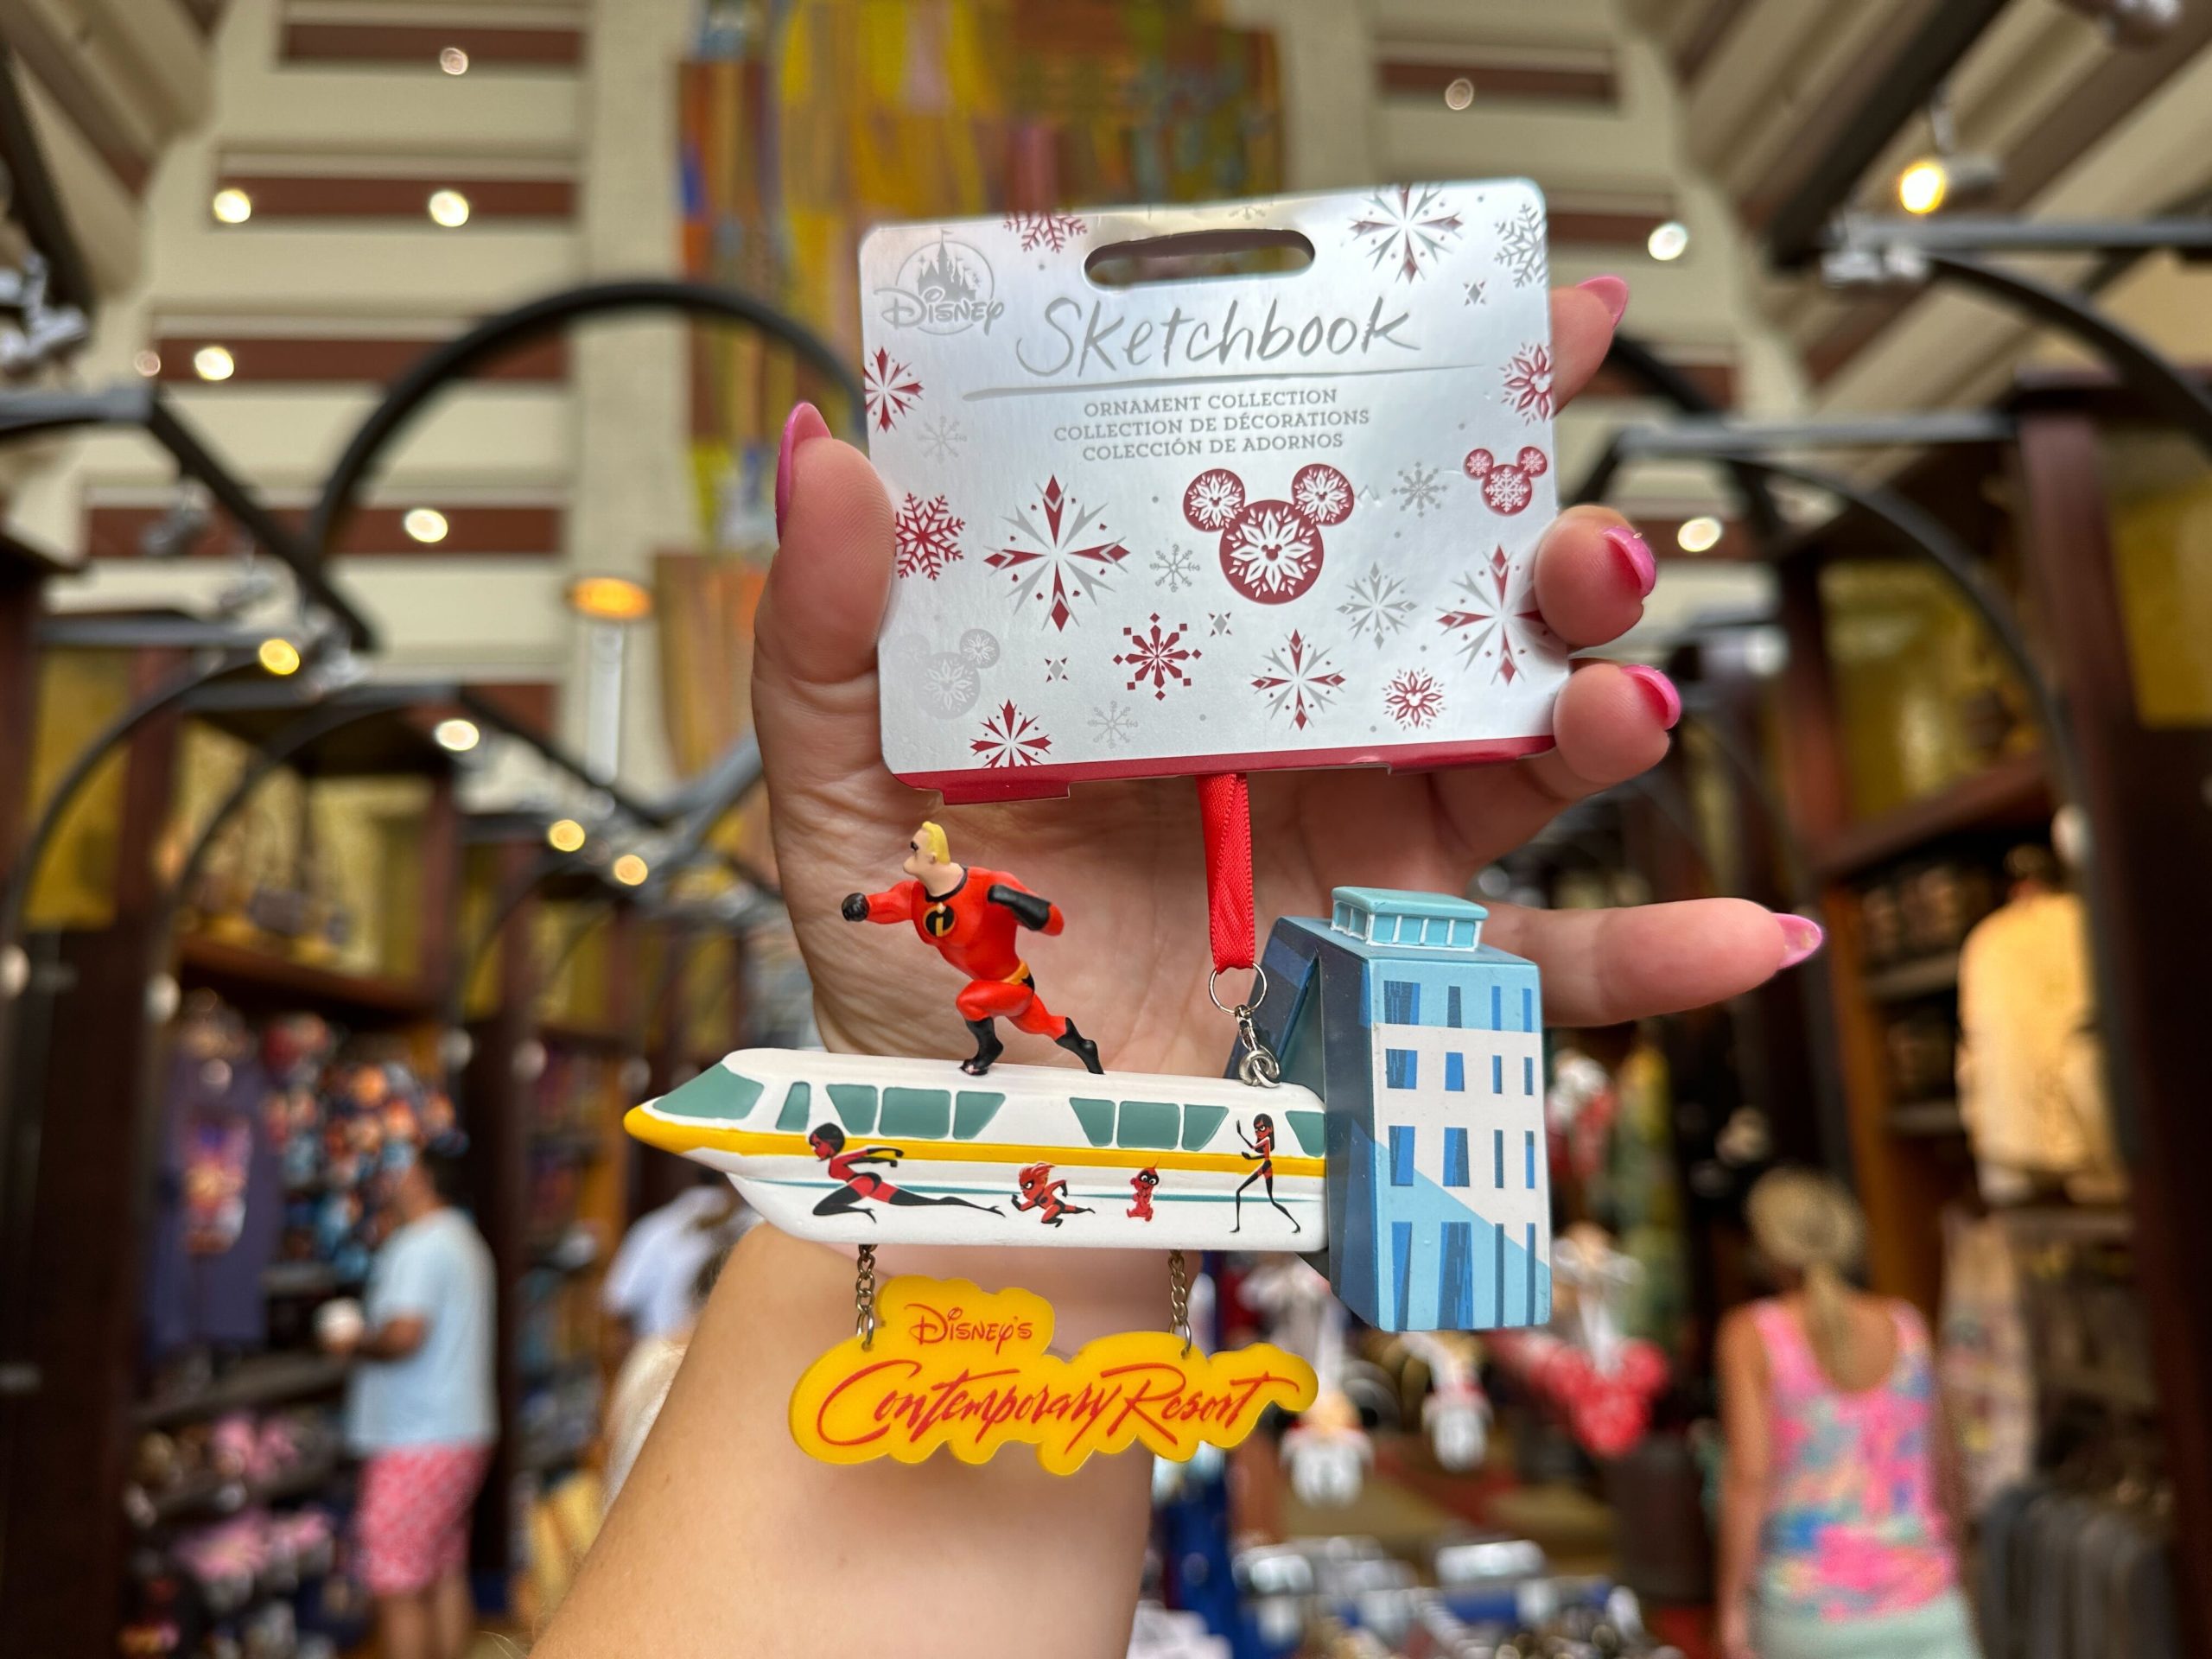 This Disney's Contemporary Resort Ornament Is "Incredible"